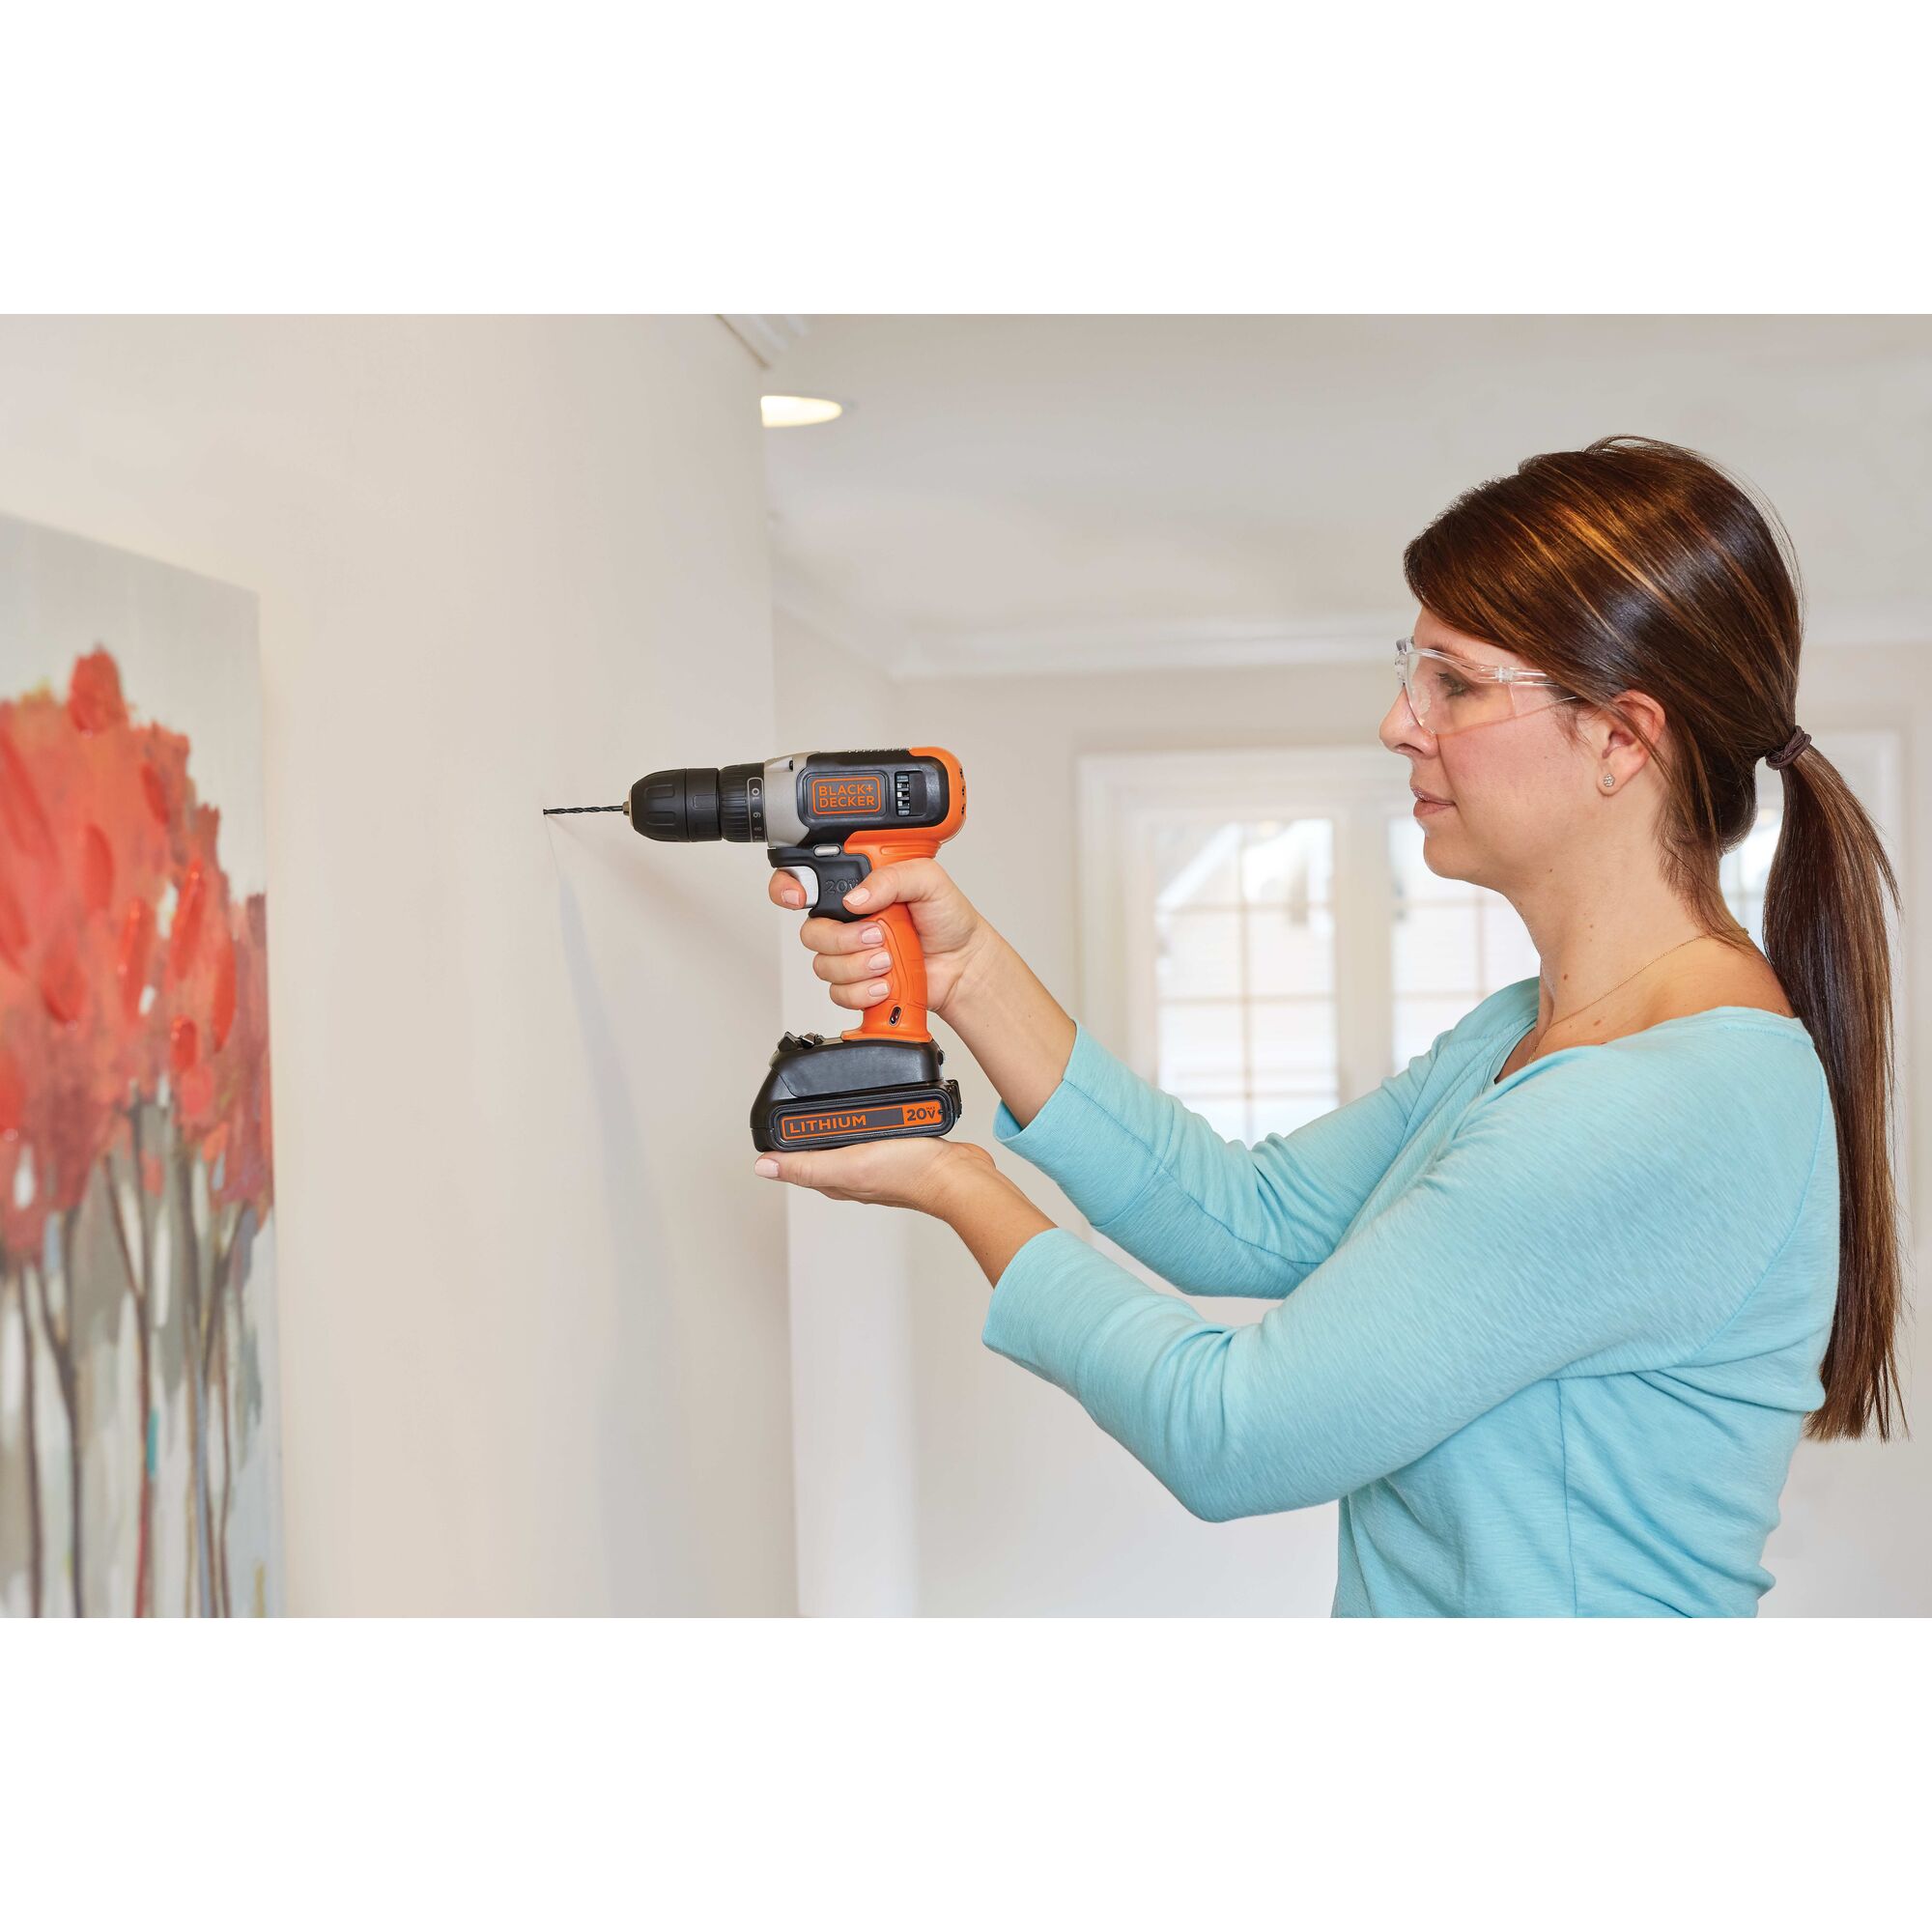 20 volt MAX drill with 63 piece hand tool and accessory home project kit being used by a person to drill a hole in wall.